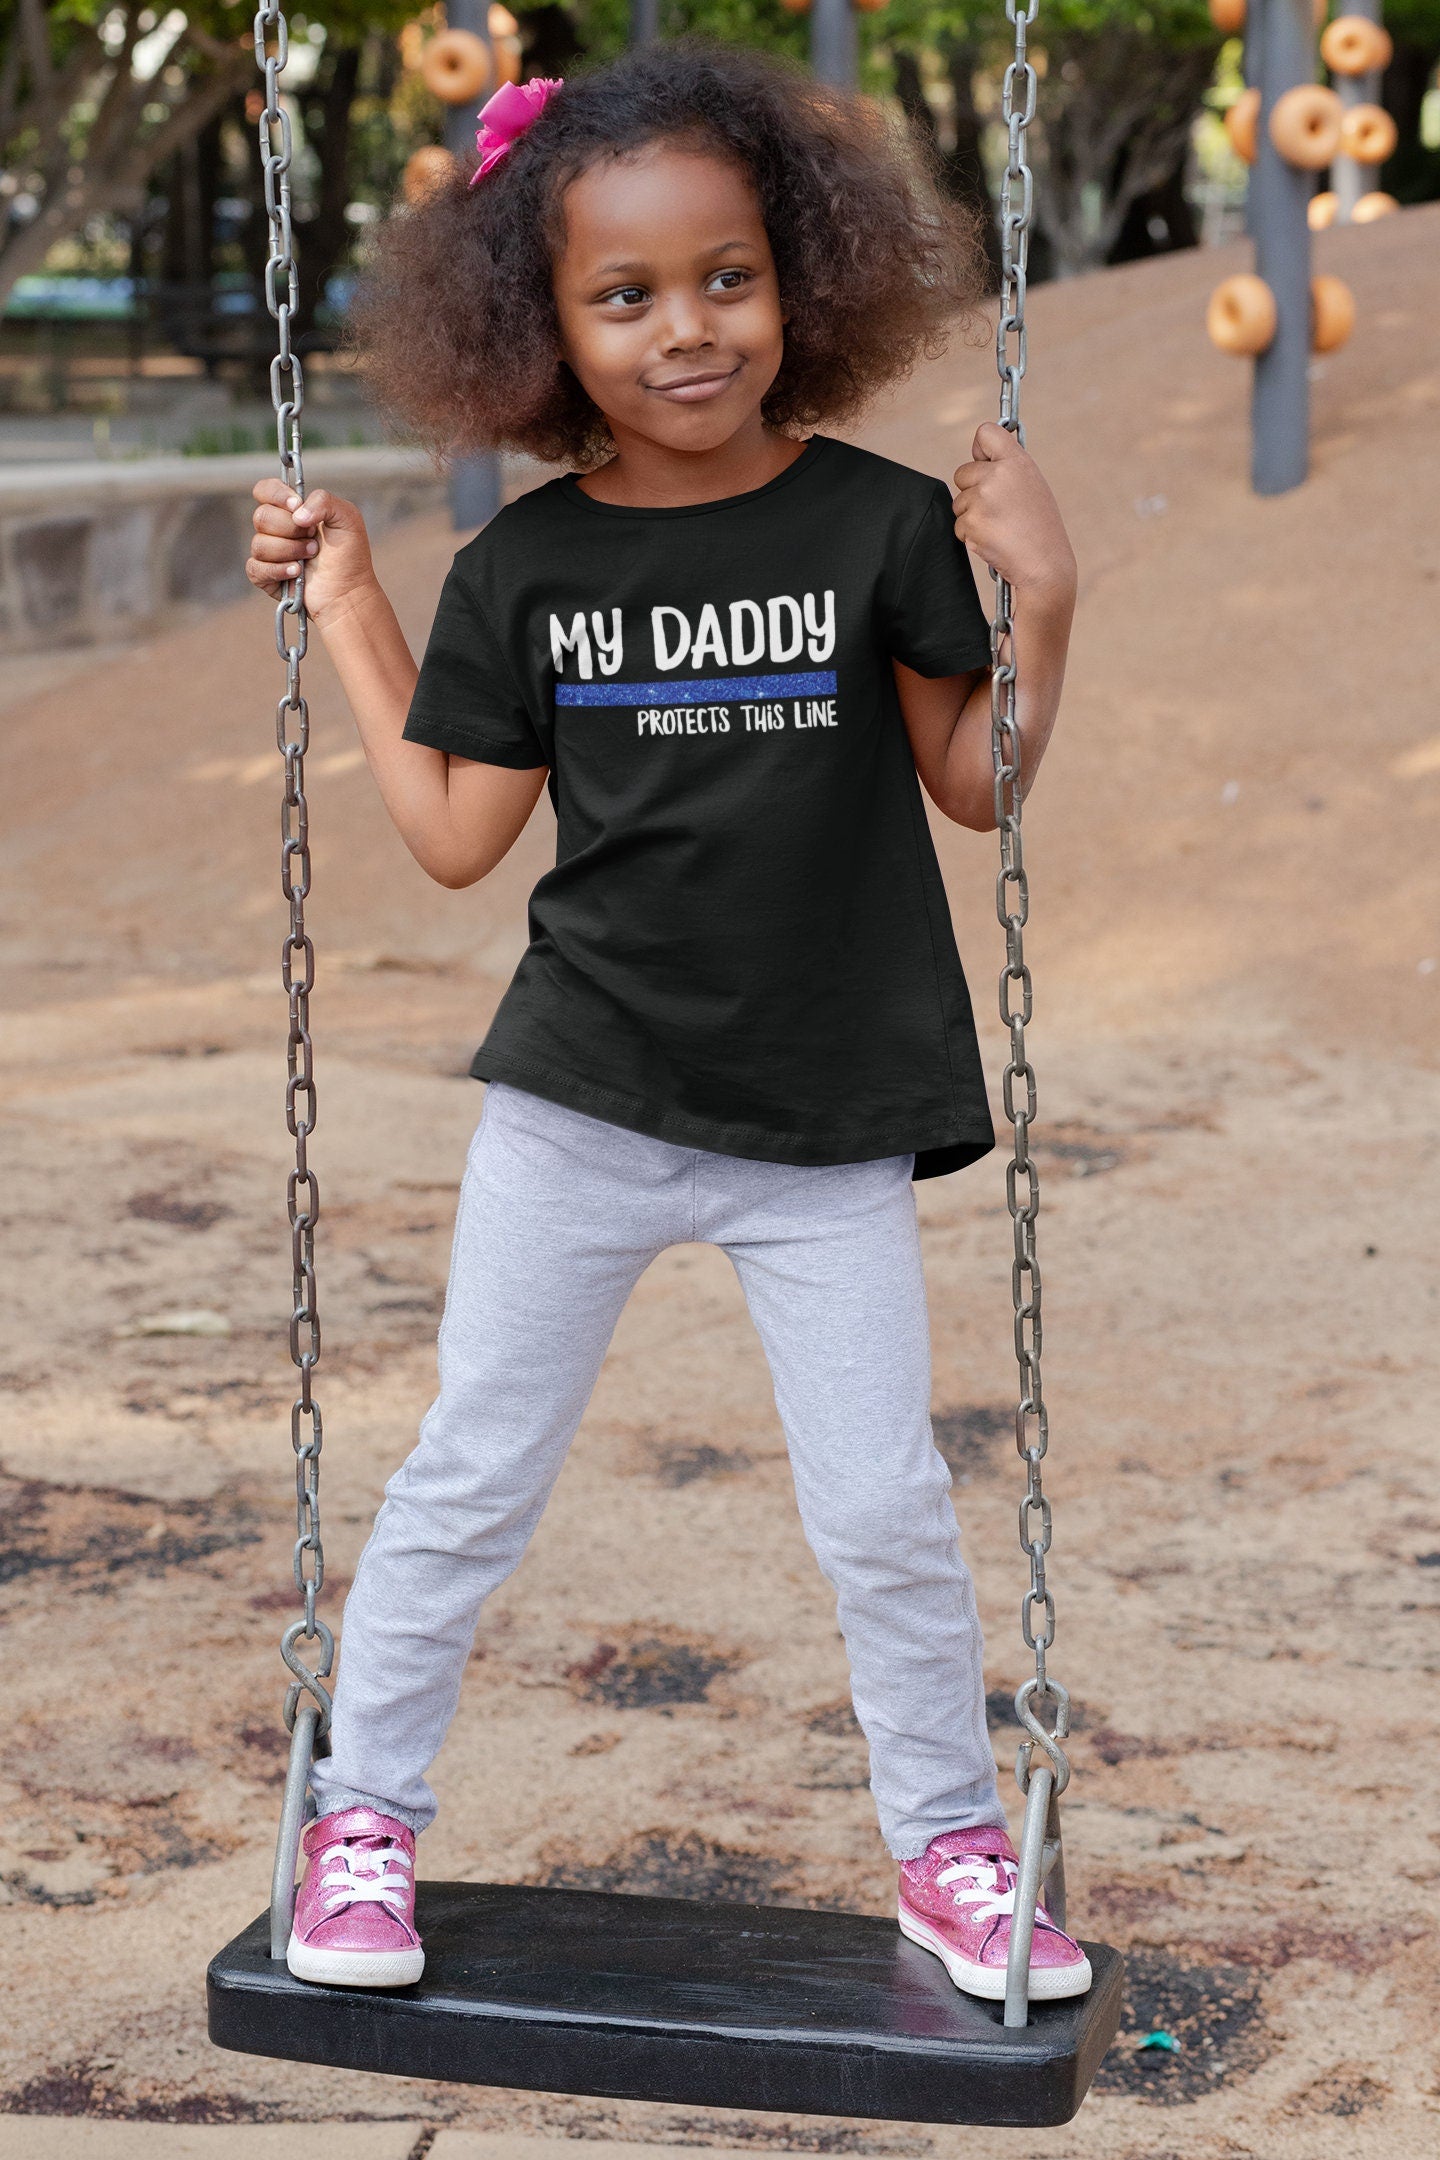 My Daddy Protects This Line Shirt, Thin Blue Line Shirt, Police Kid Shirt, Deputy Kid Shirt